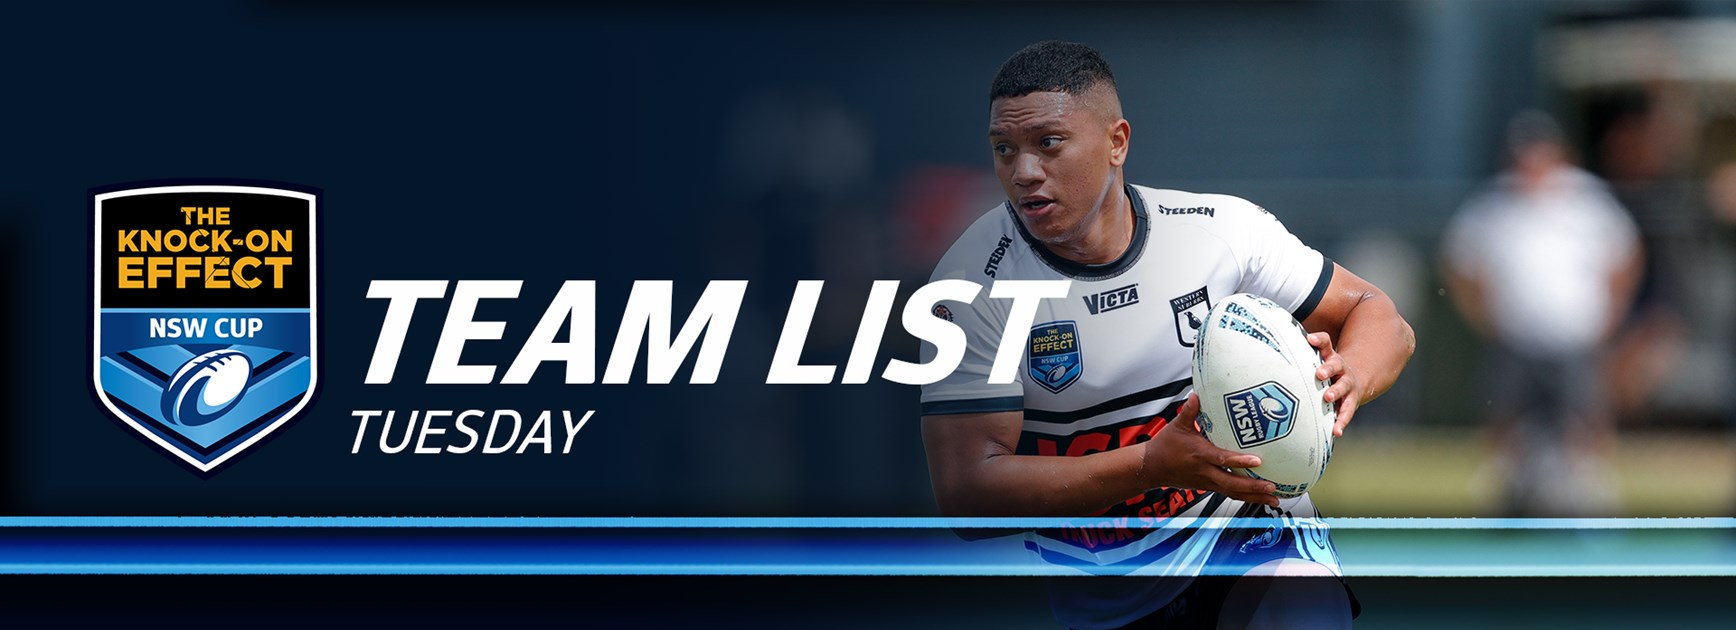 Team List Tuesday | The Knock-On Effect NSW Cup